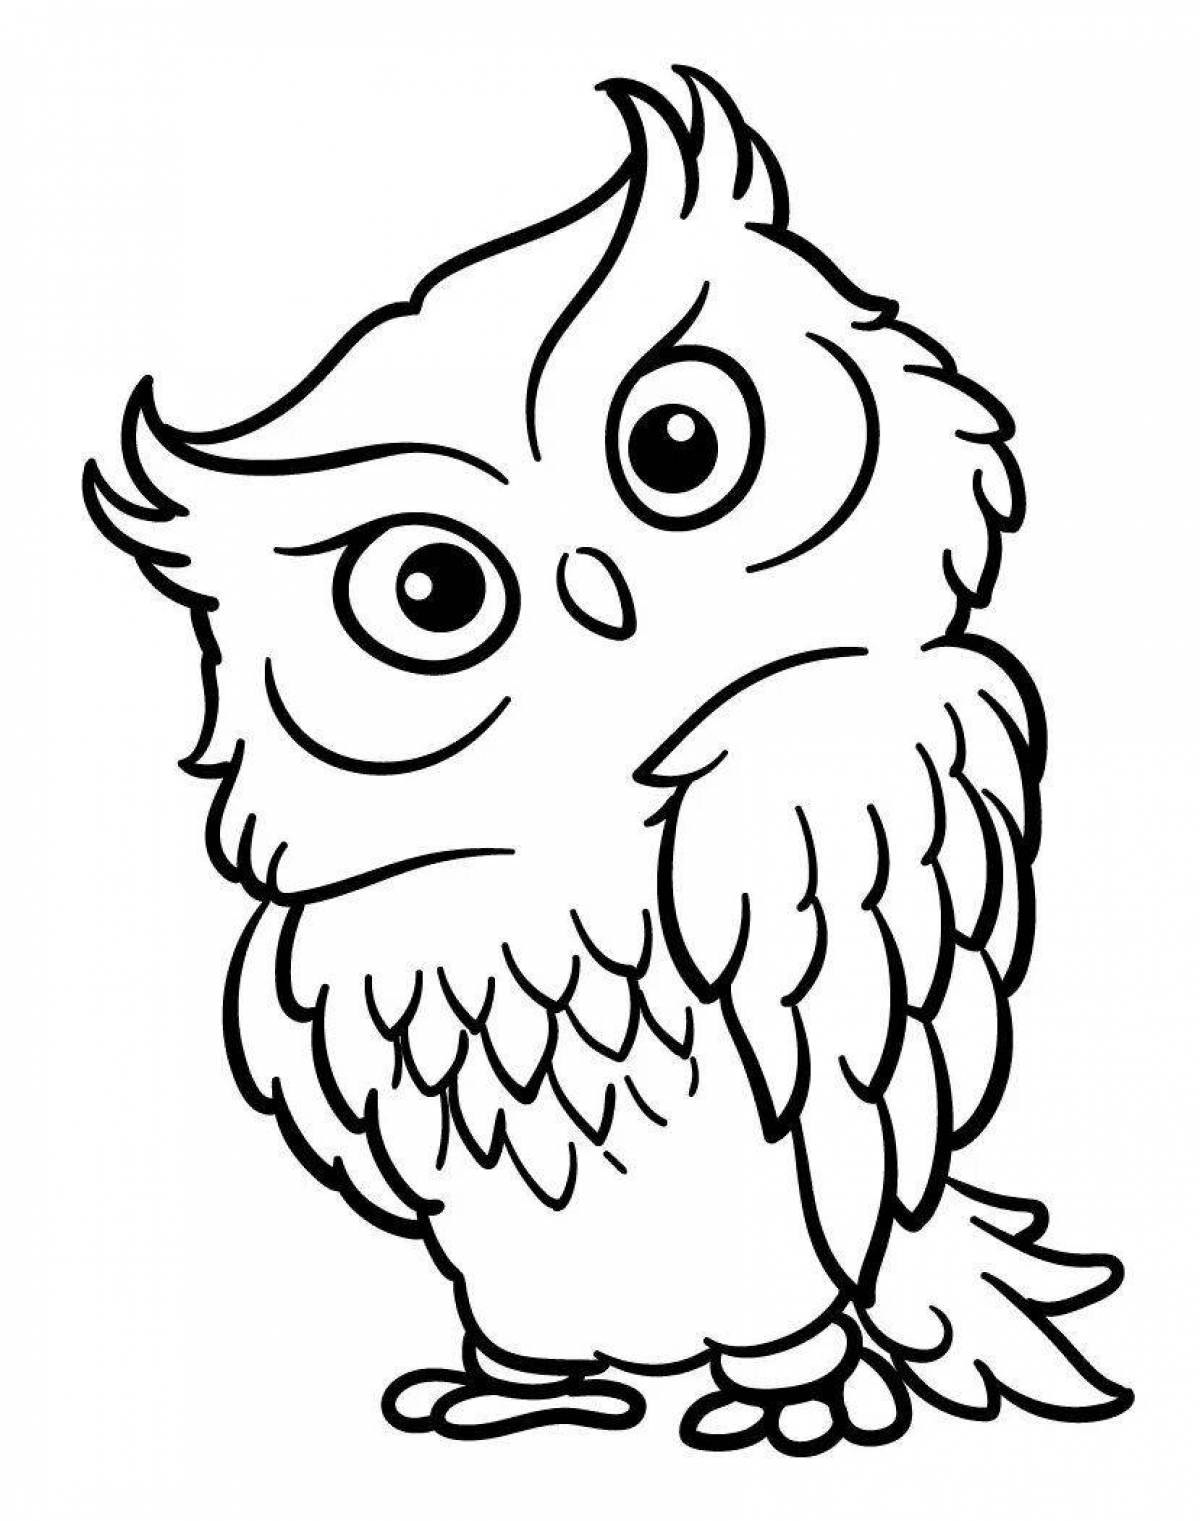 Incredible snowy owl coloring book for kids